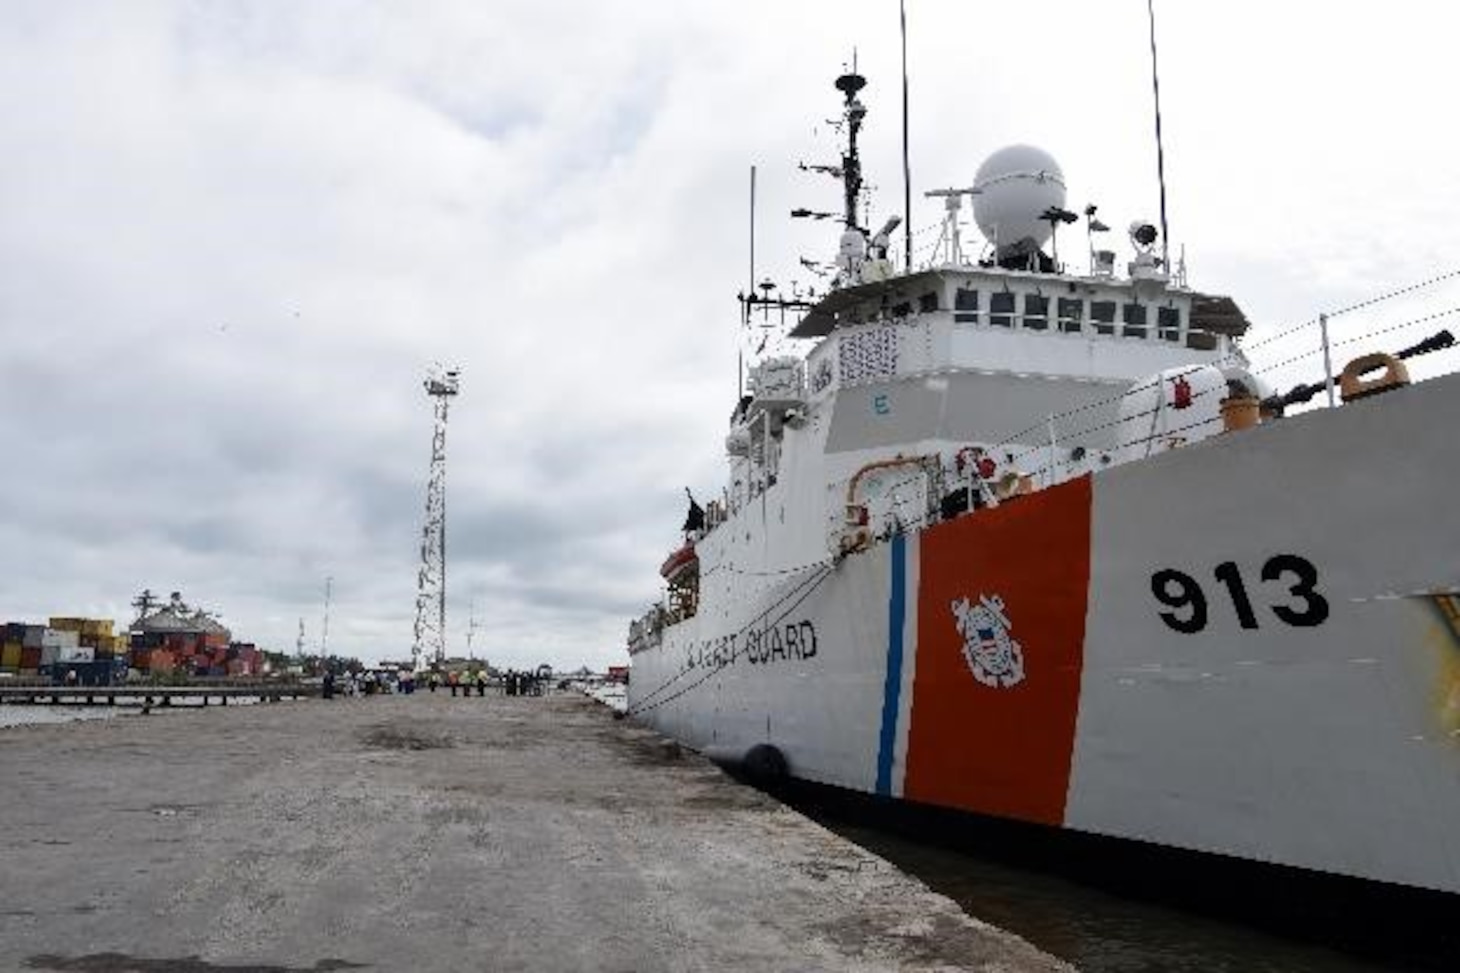 220725-G-XT974-1013
The Famous-class medium endurance cutter USCGC Mohawk (WMEC 913) sits at the pier after arriving in Banjul, Gambia, July 25, 2022. USCGC Mohawk is on a scheduled deployment in the U.S. Naval Forces Africa area of operations, employed by U.S. Sixth Fleet to defend U.S., allied, and partner interests. (U.S. Coast Guard photo by Petty Officer 3rd Class Jessica Fontenette)